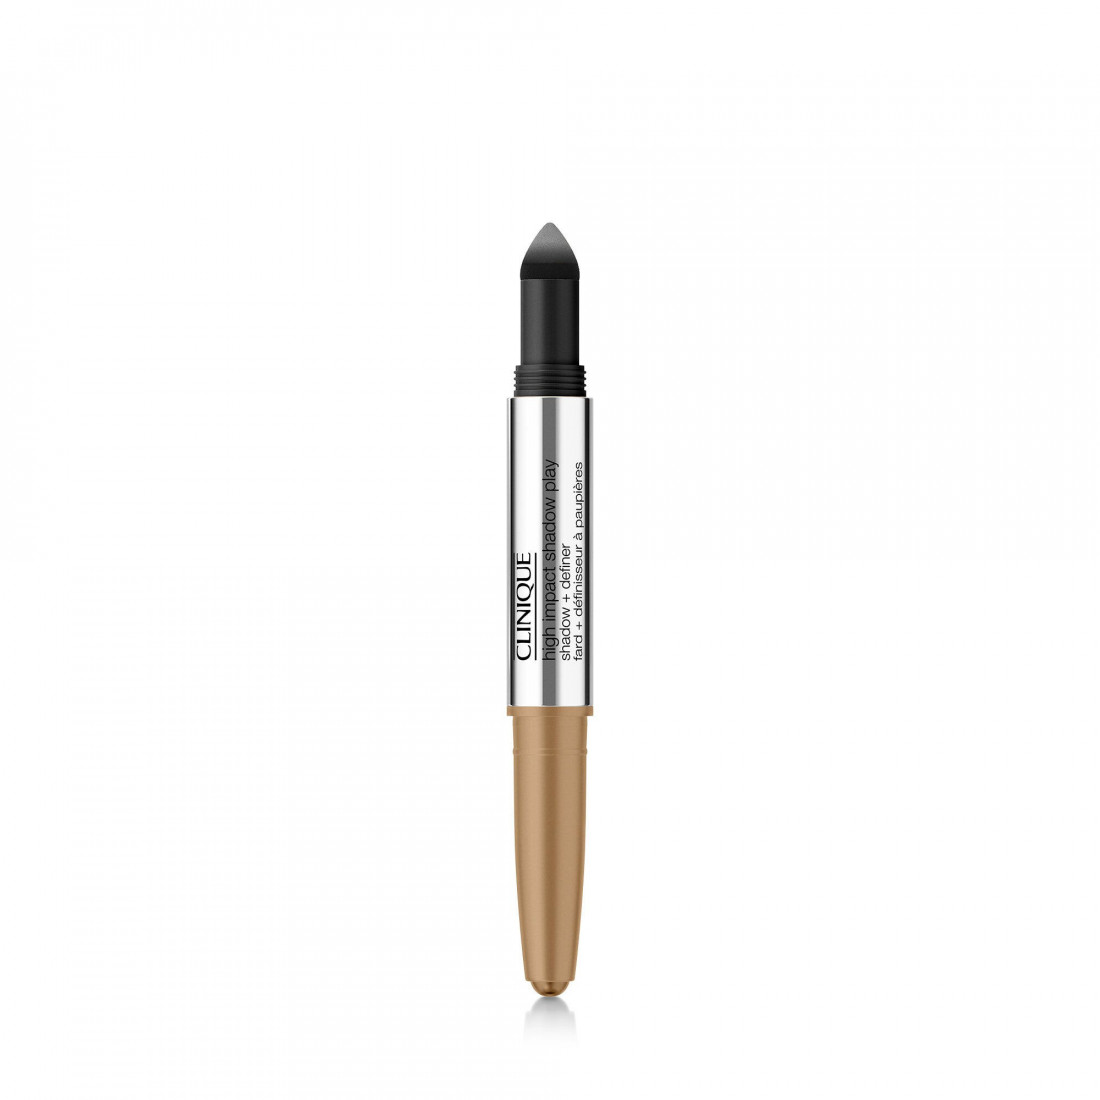 Ombretto HI SHADOW PLAY + definitore d& 39 ombra champagne + caviale 4 ml